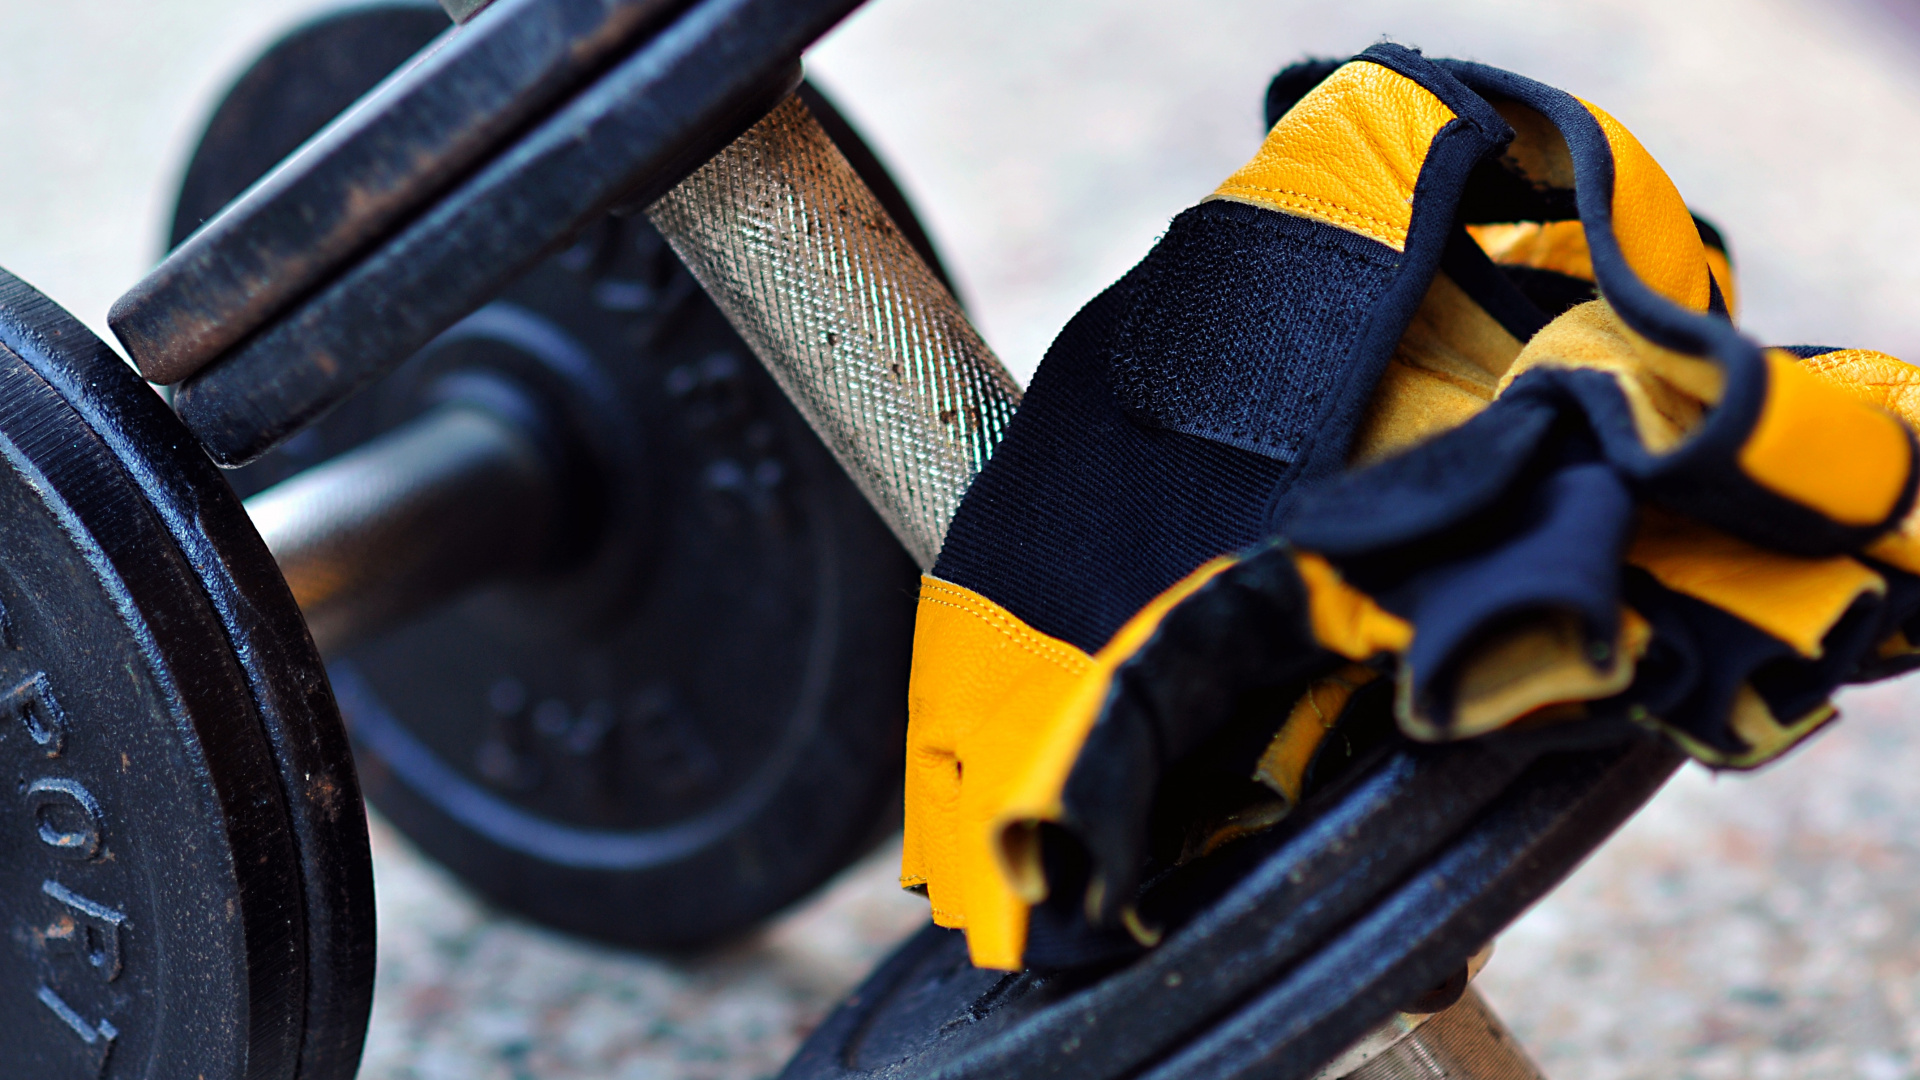 Black and Yellow Dumbbell on Gray Concrete Floor. Wallpaper in 1920x1080 Resolution